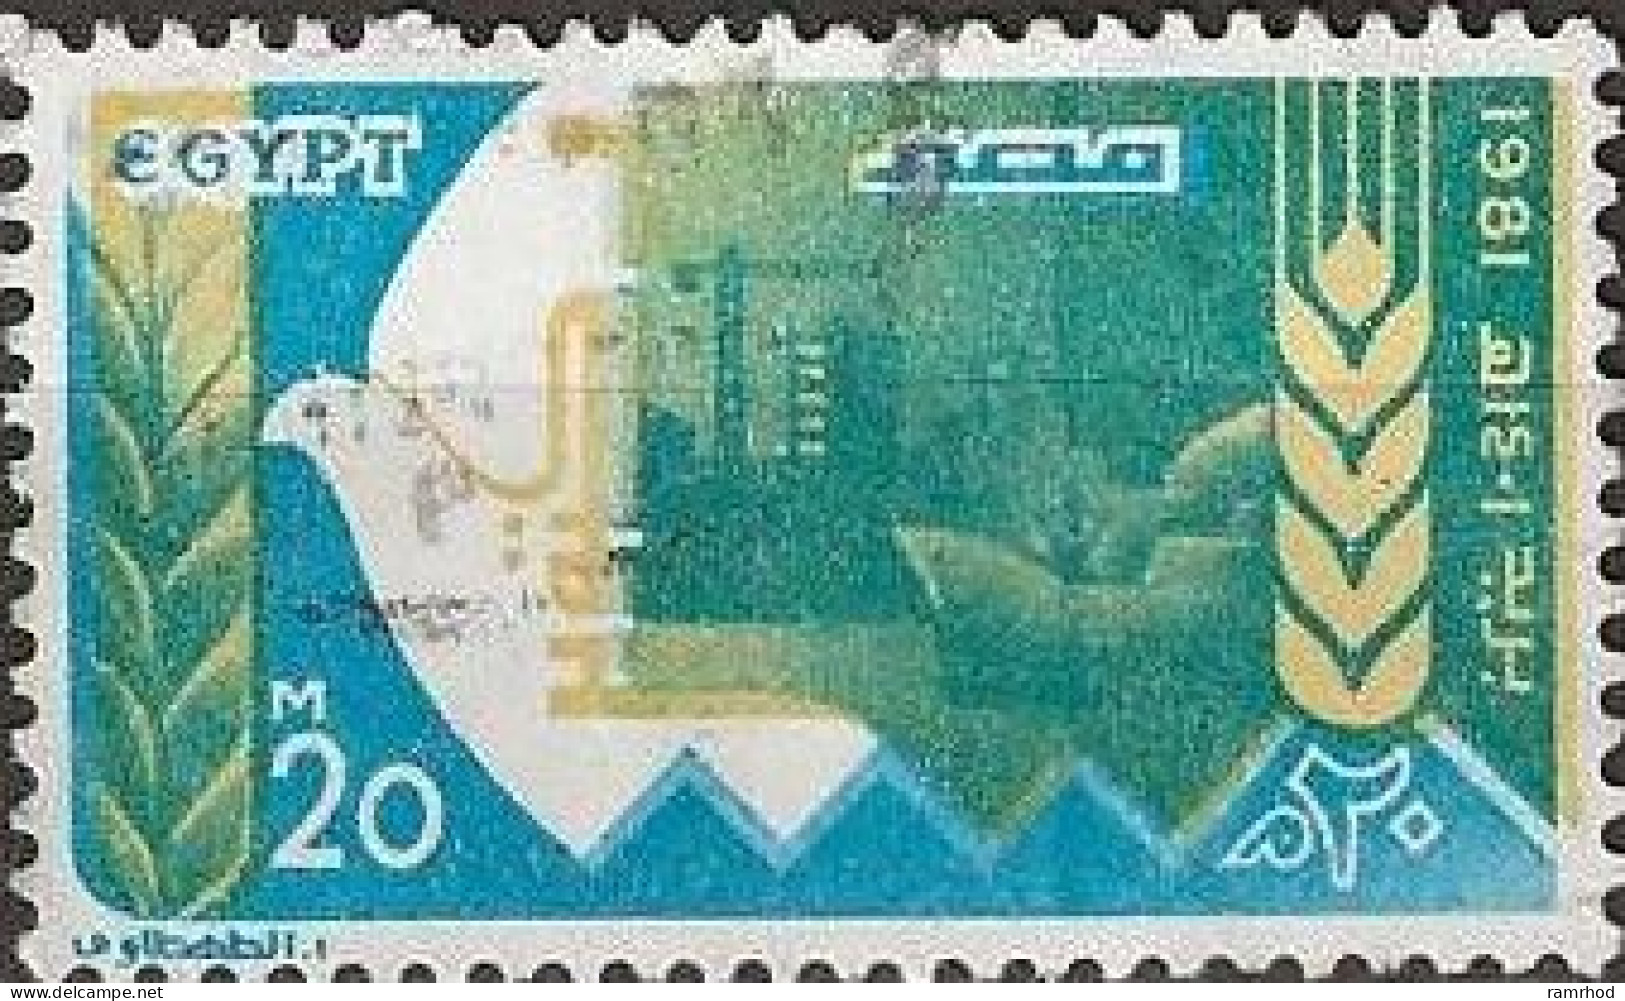 EGYPT 1981 Eighth Anniversary Of Suez Crossing - 20m - Olive, Dove, Canal And Wheat FU - Usati